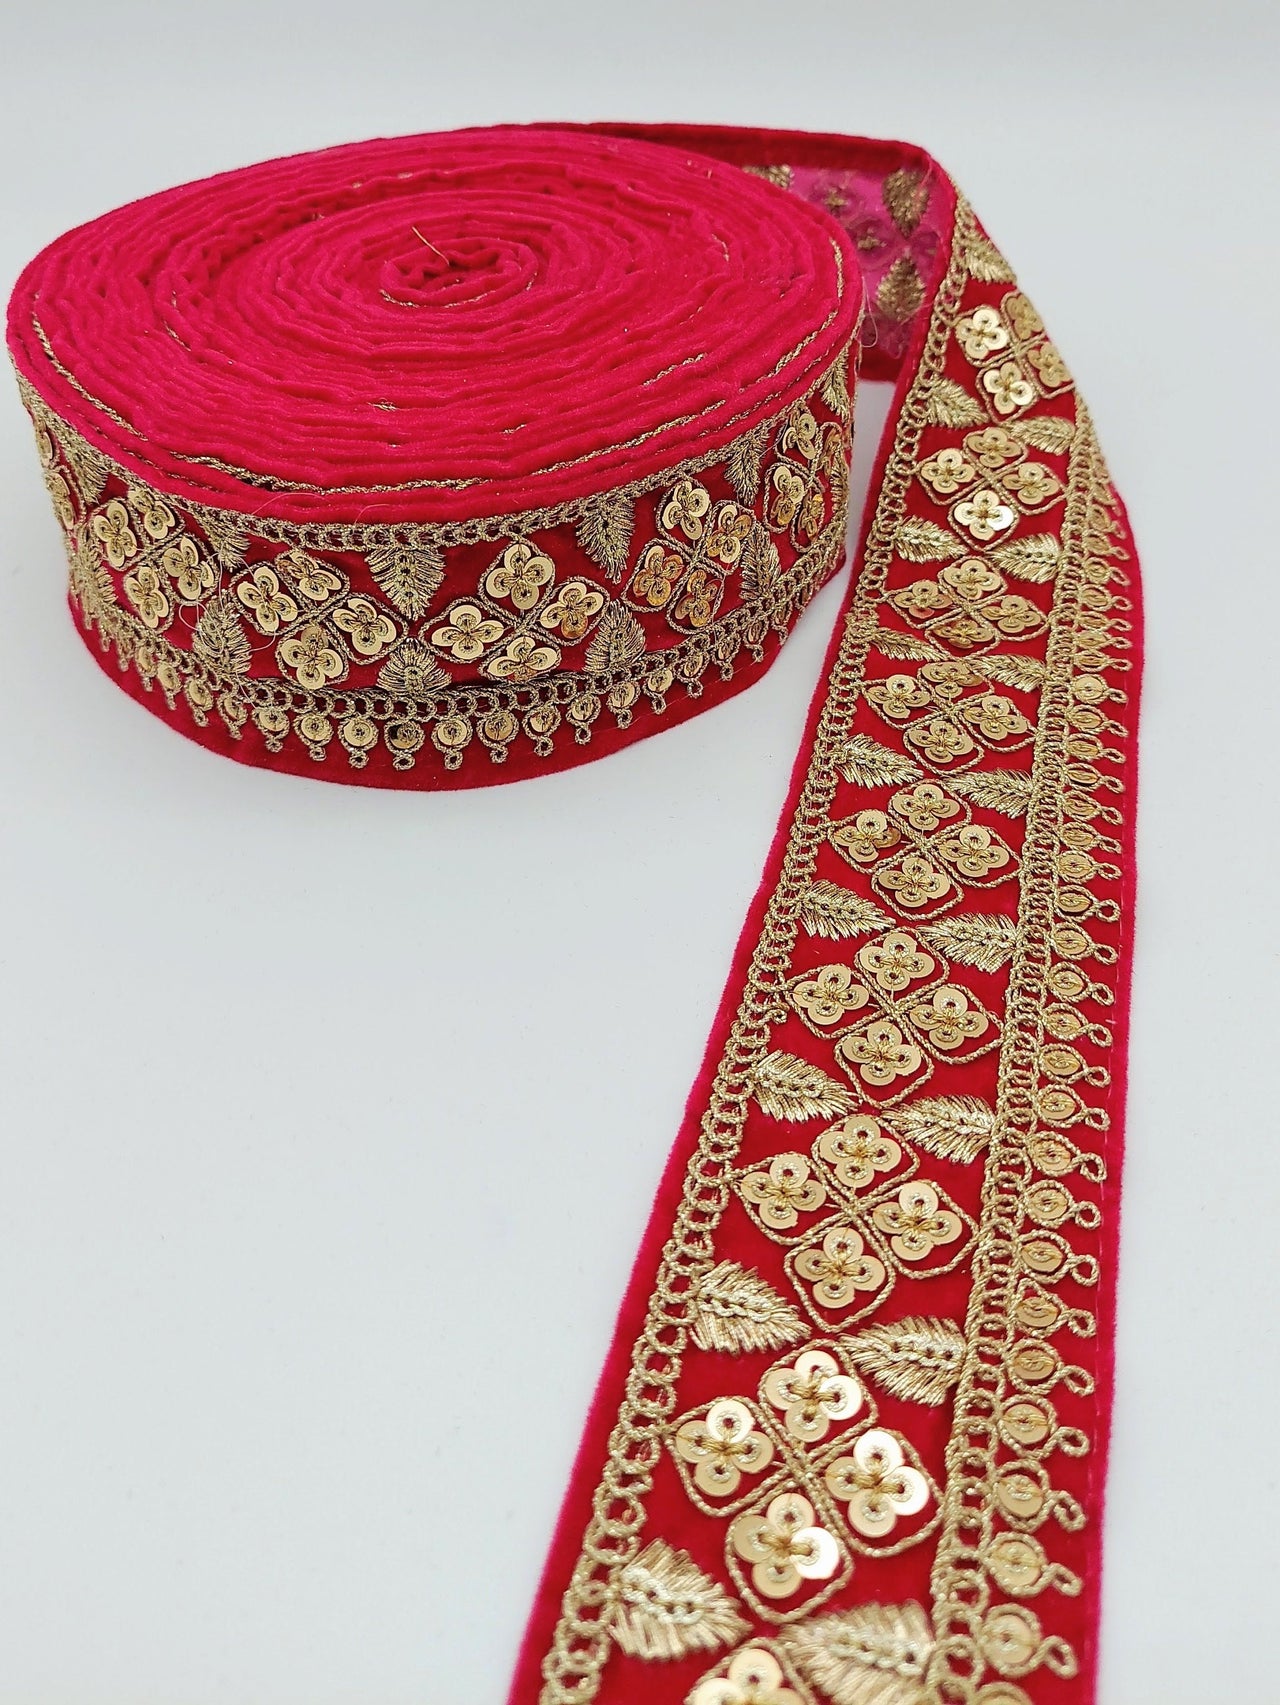 Velvet Fabric Sari Border Trim With Gold Sequins Embroidery, Trim By 9 Yards, Decorative Trimming